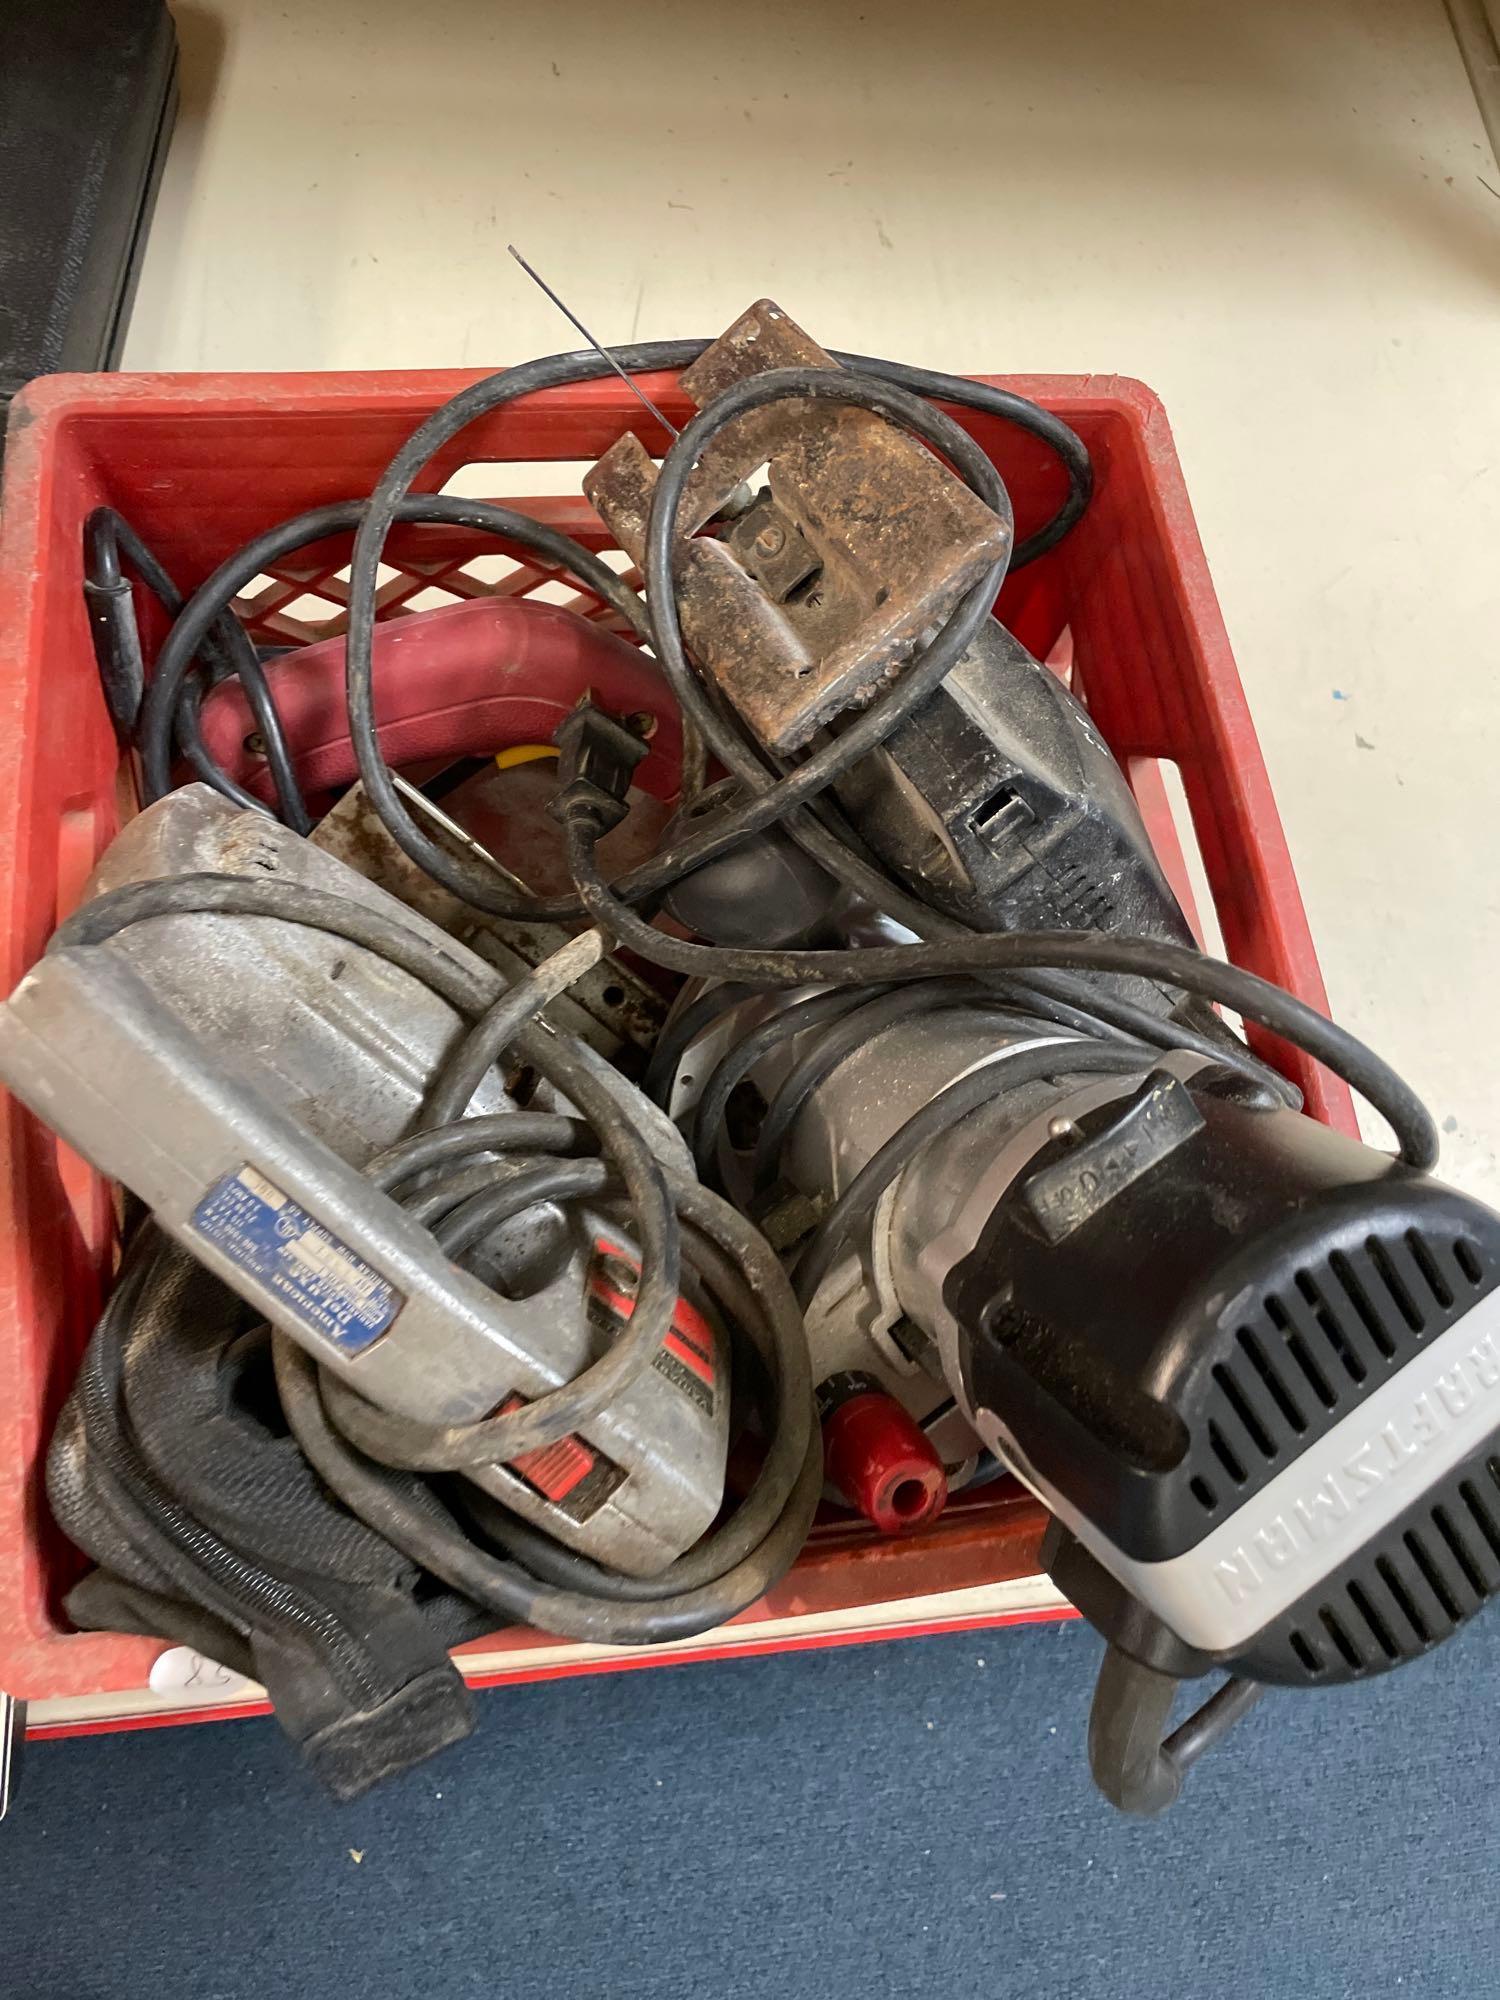 Various power tools including a saw